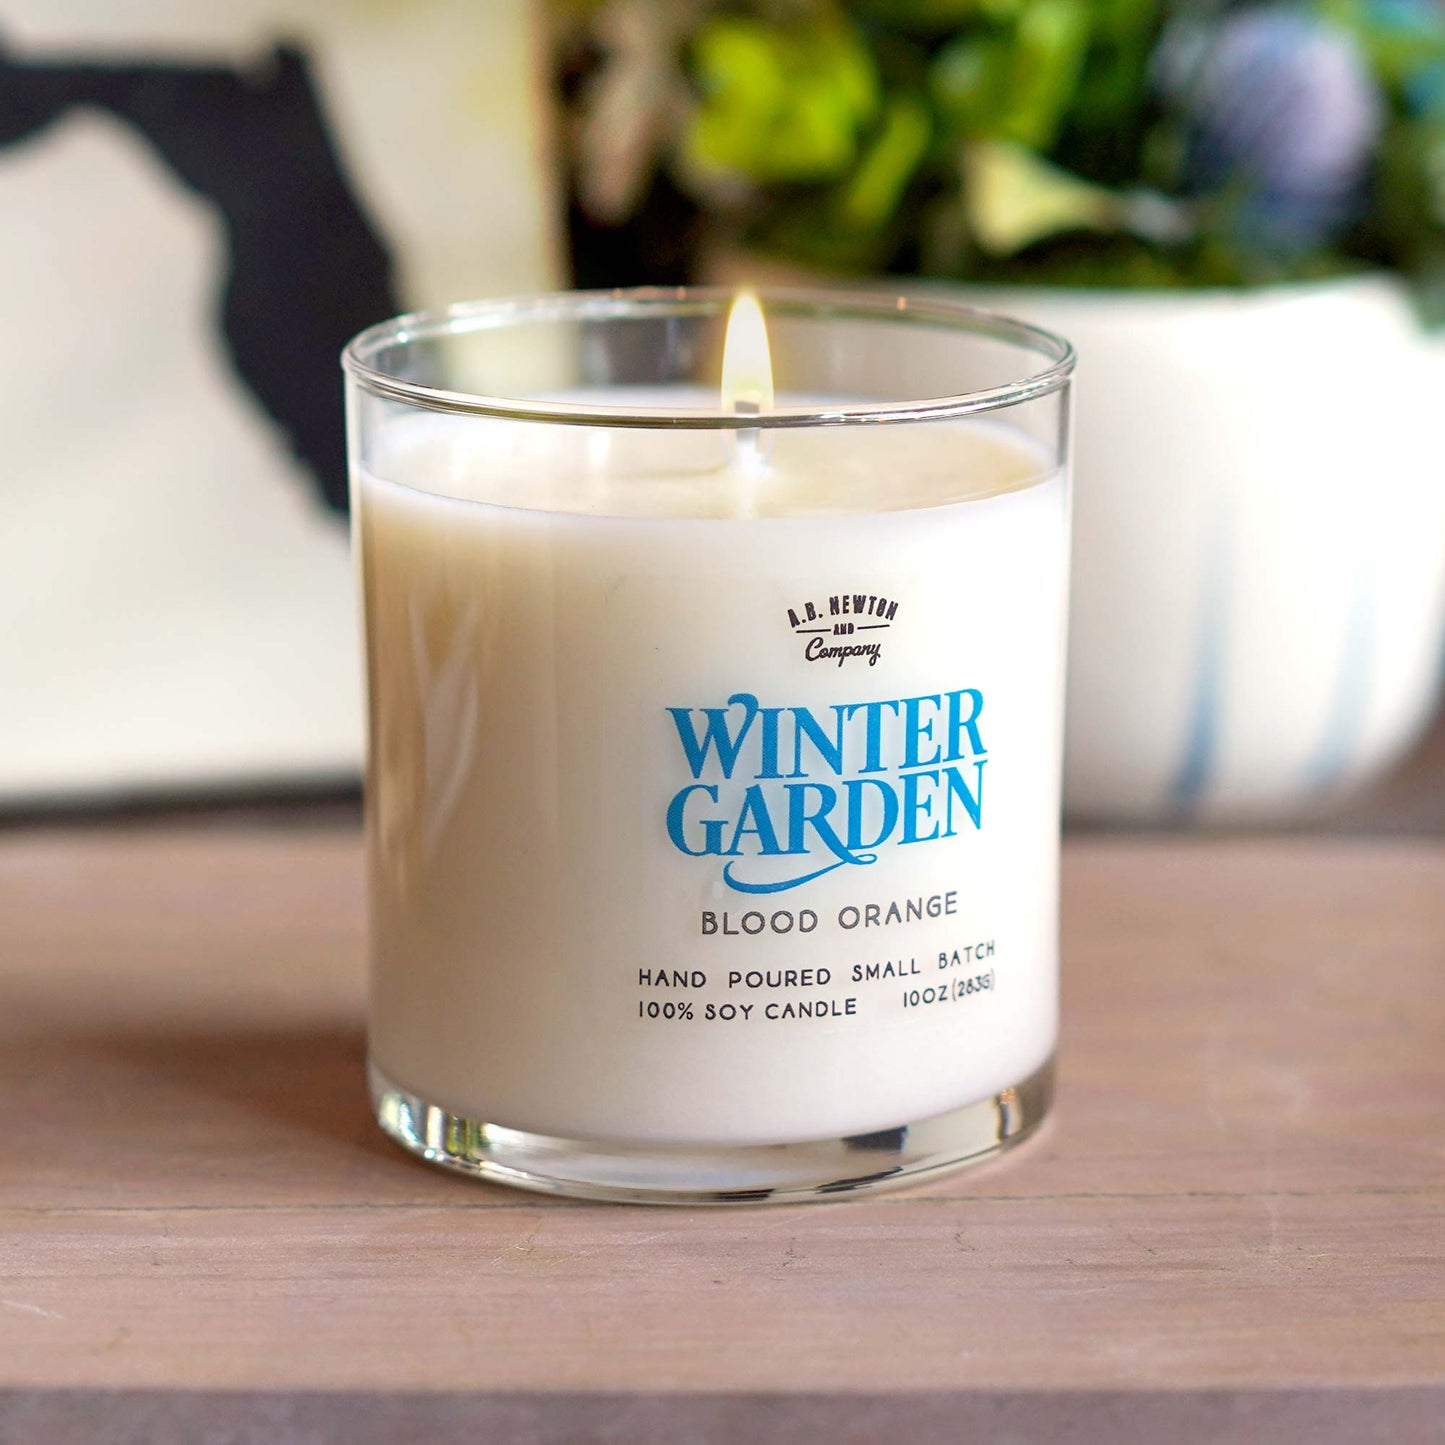 Winter Garden Blood Orange Scented Soy Candle Hand Poured - A. B. Newton and Company